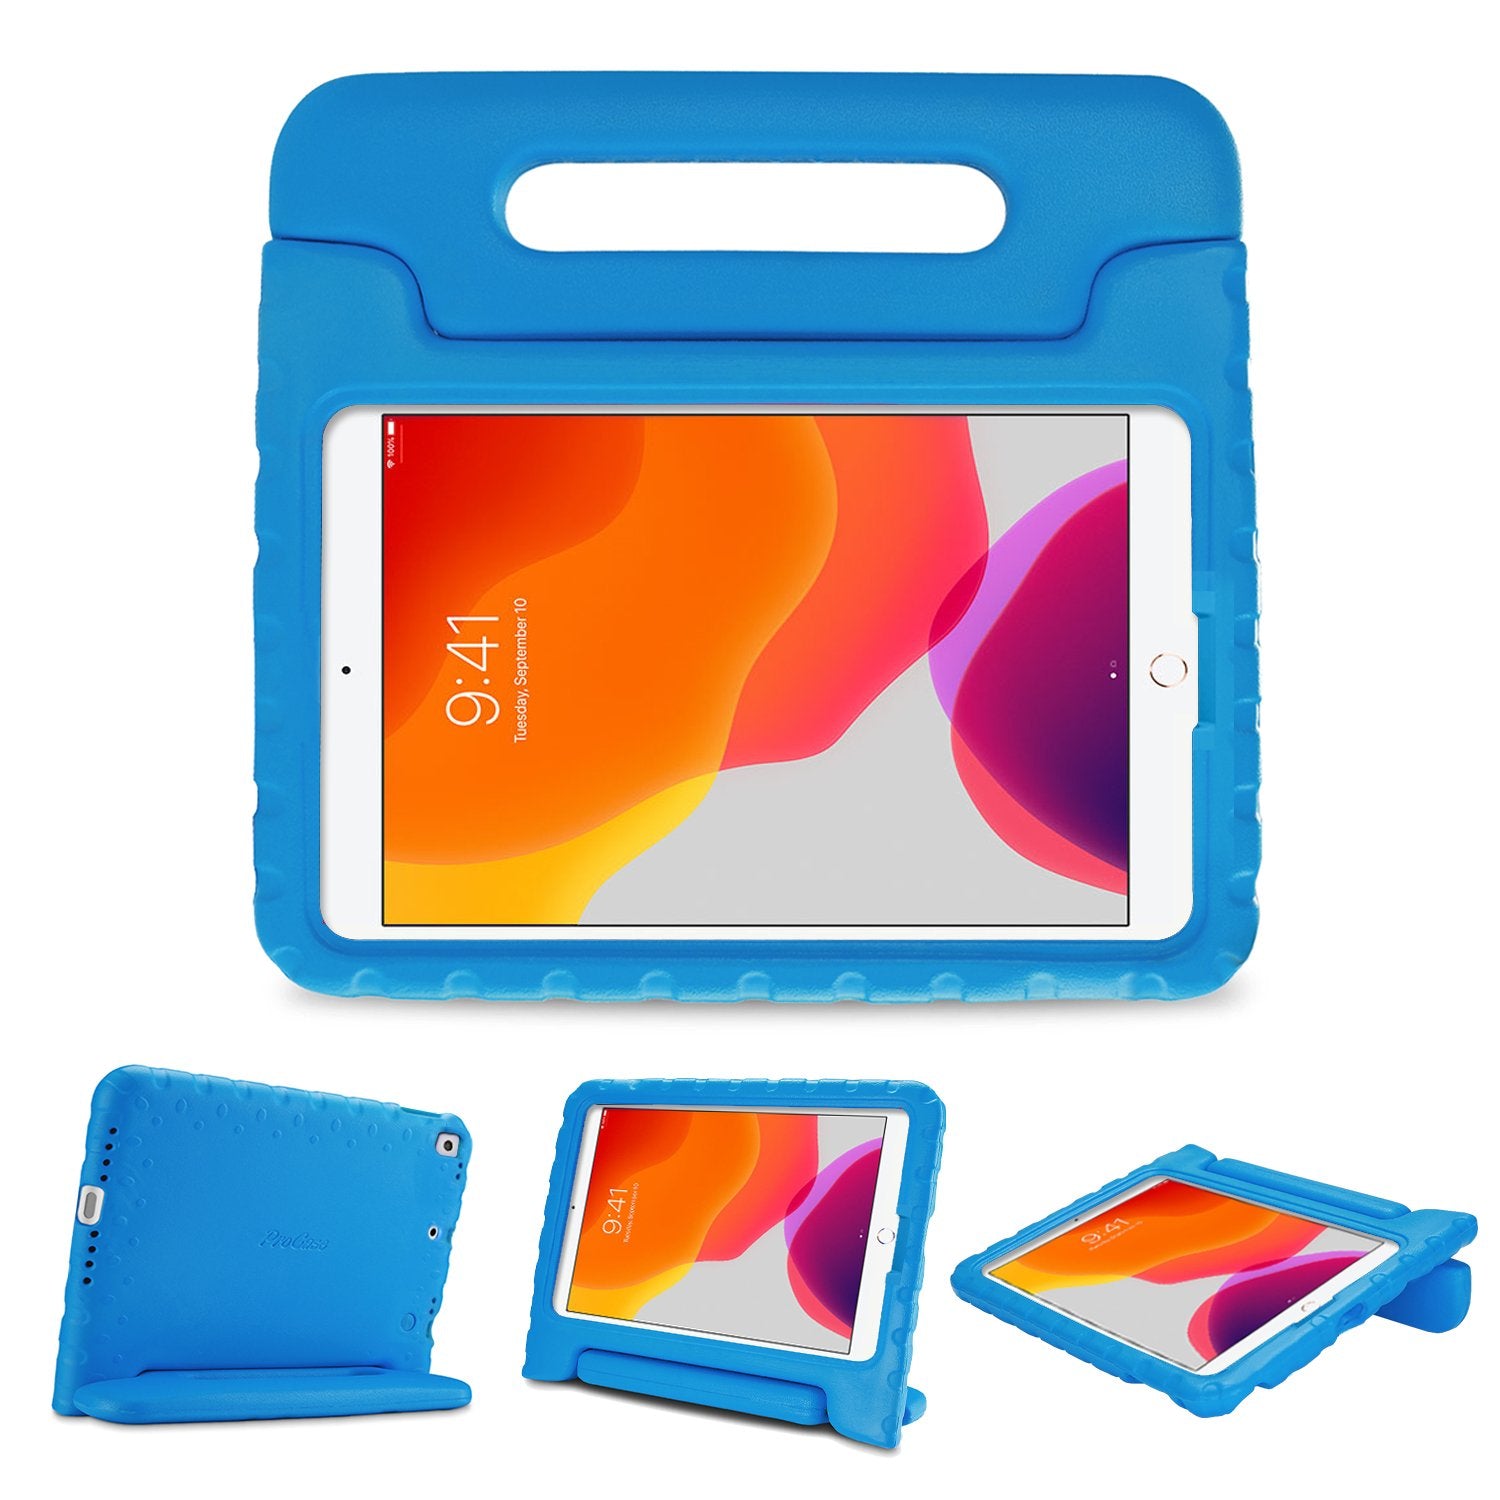 iPad 10.2 7th/8th 2019 2020/Pro 10.5/Air 3rd Generation case for Kids | ProCase blue